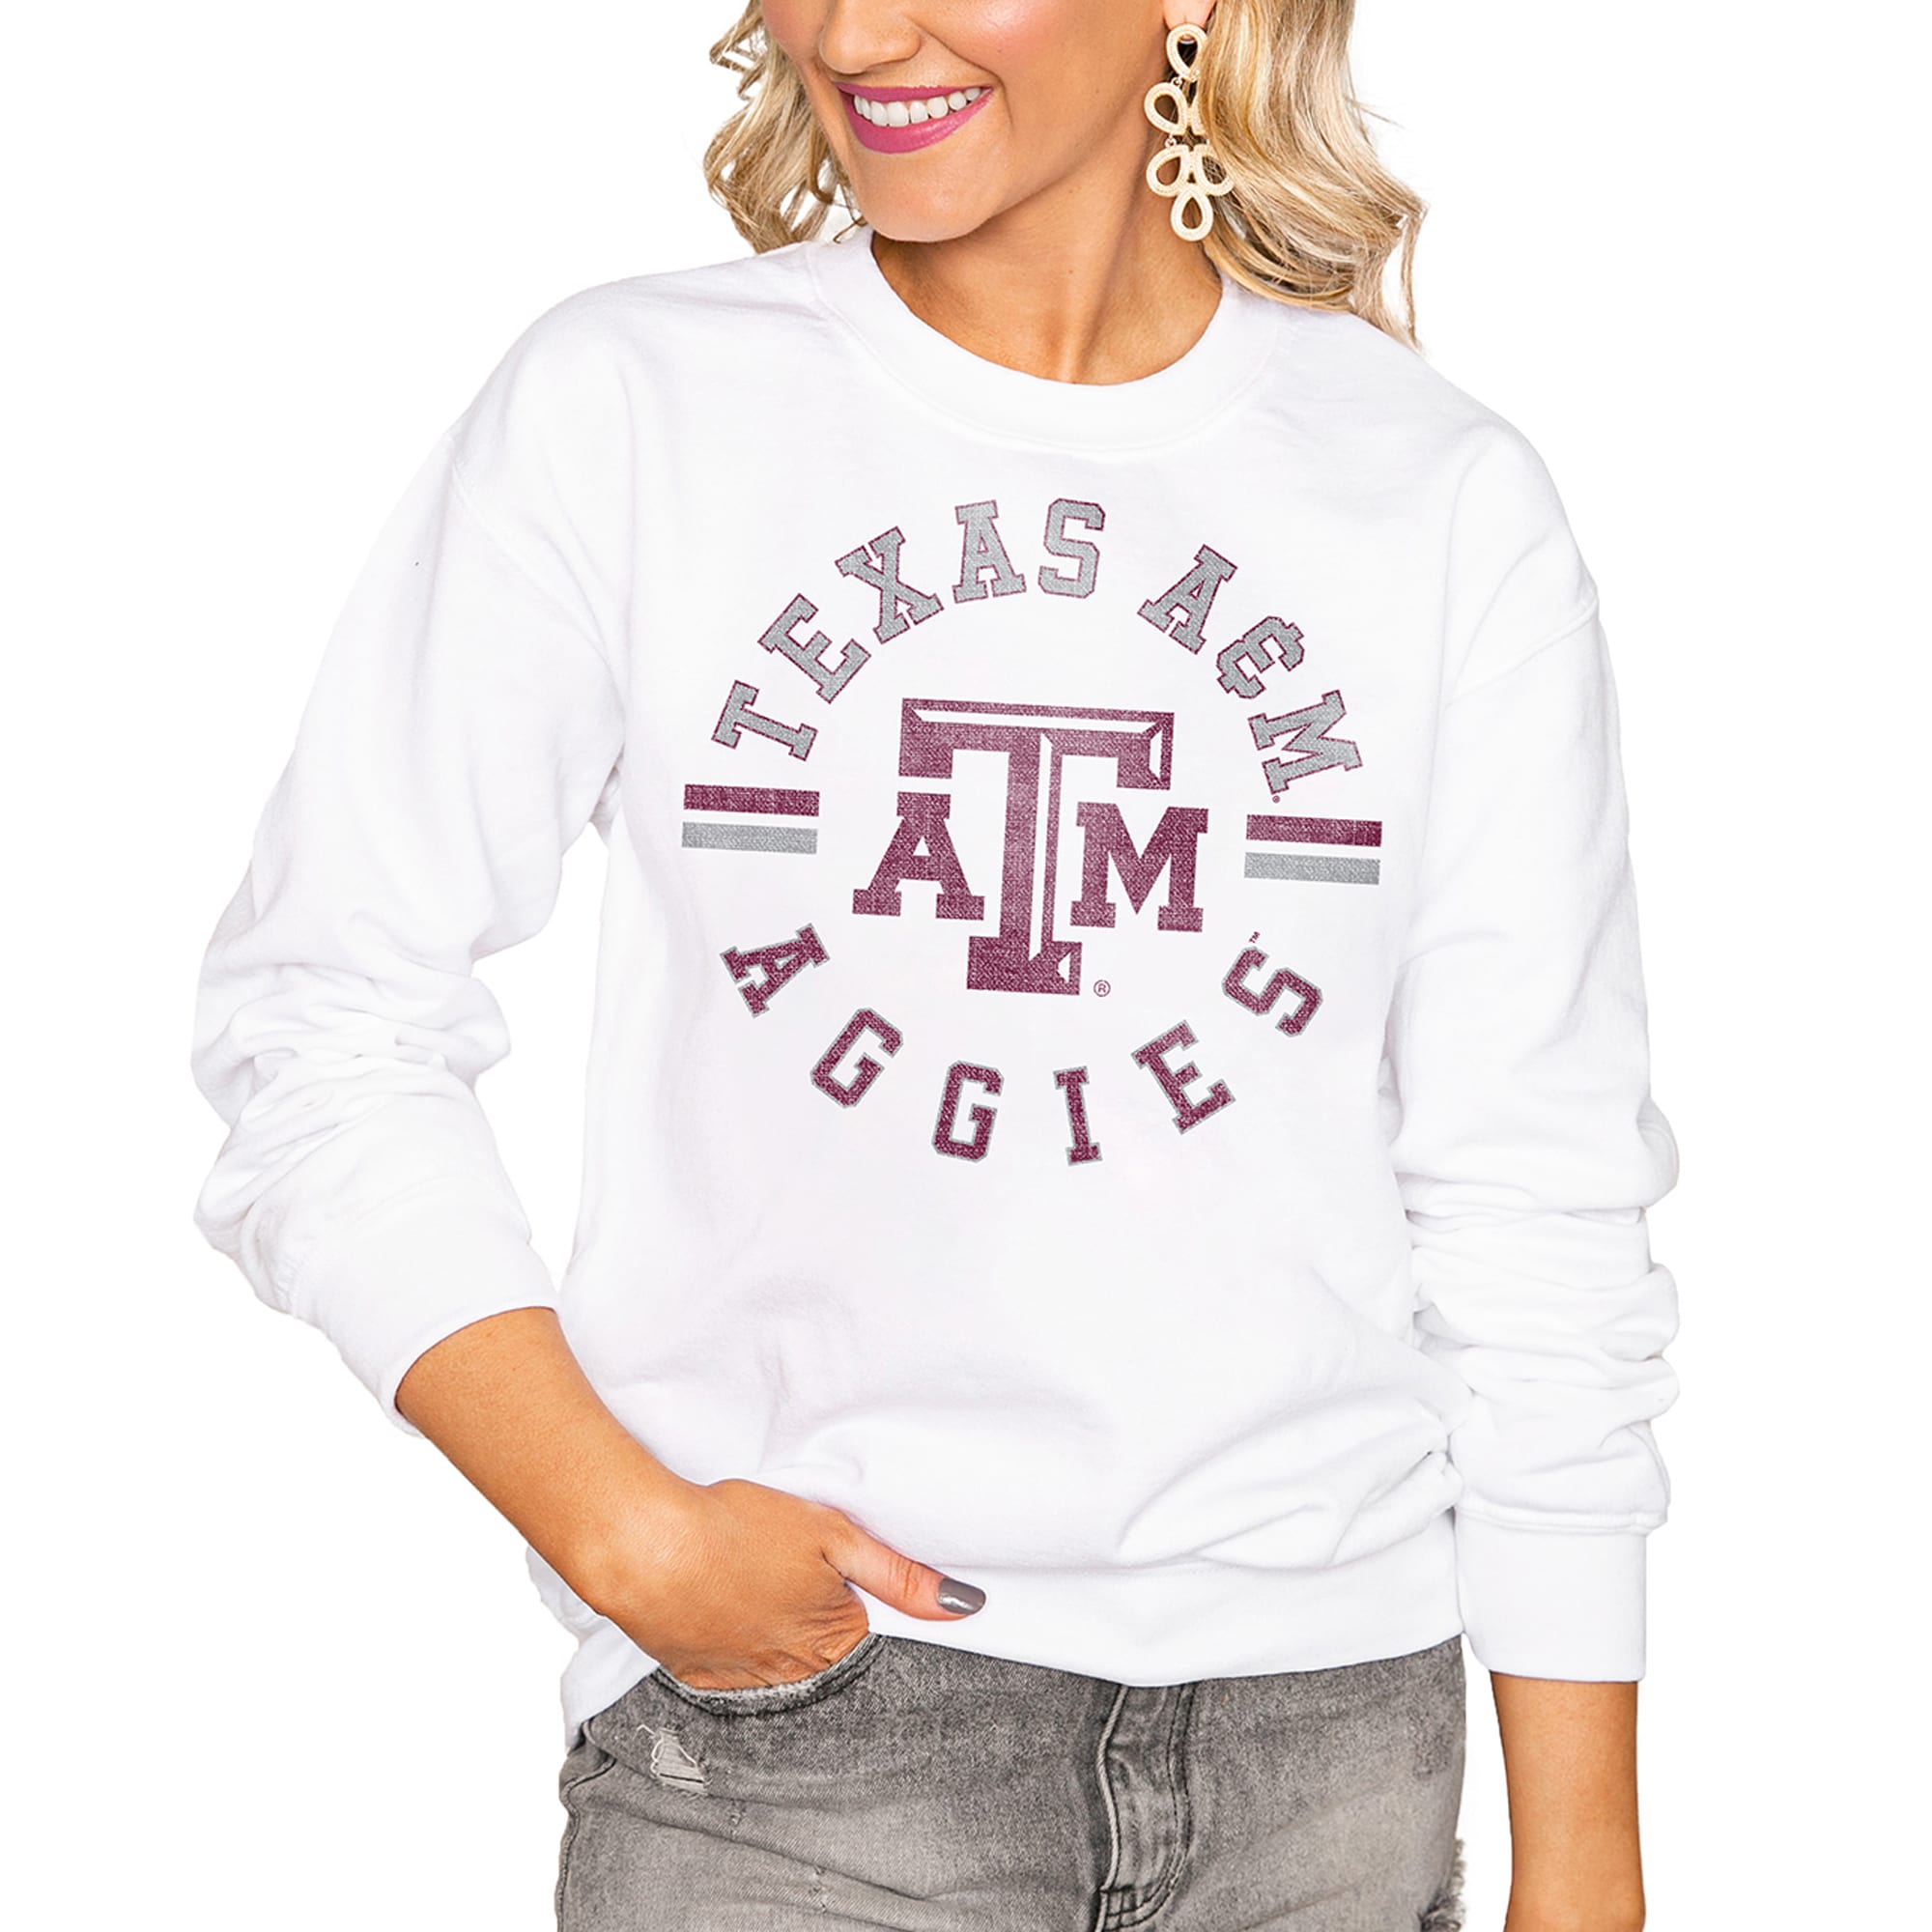 Women's White Texas A&M Aggies Vintage Days Perfect Pullover Sweatshirt - image 1 of 1